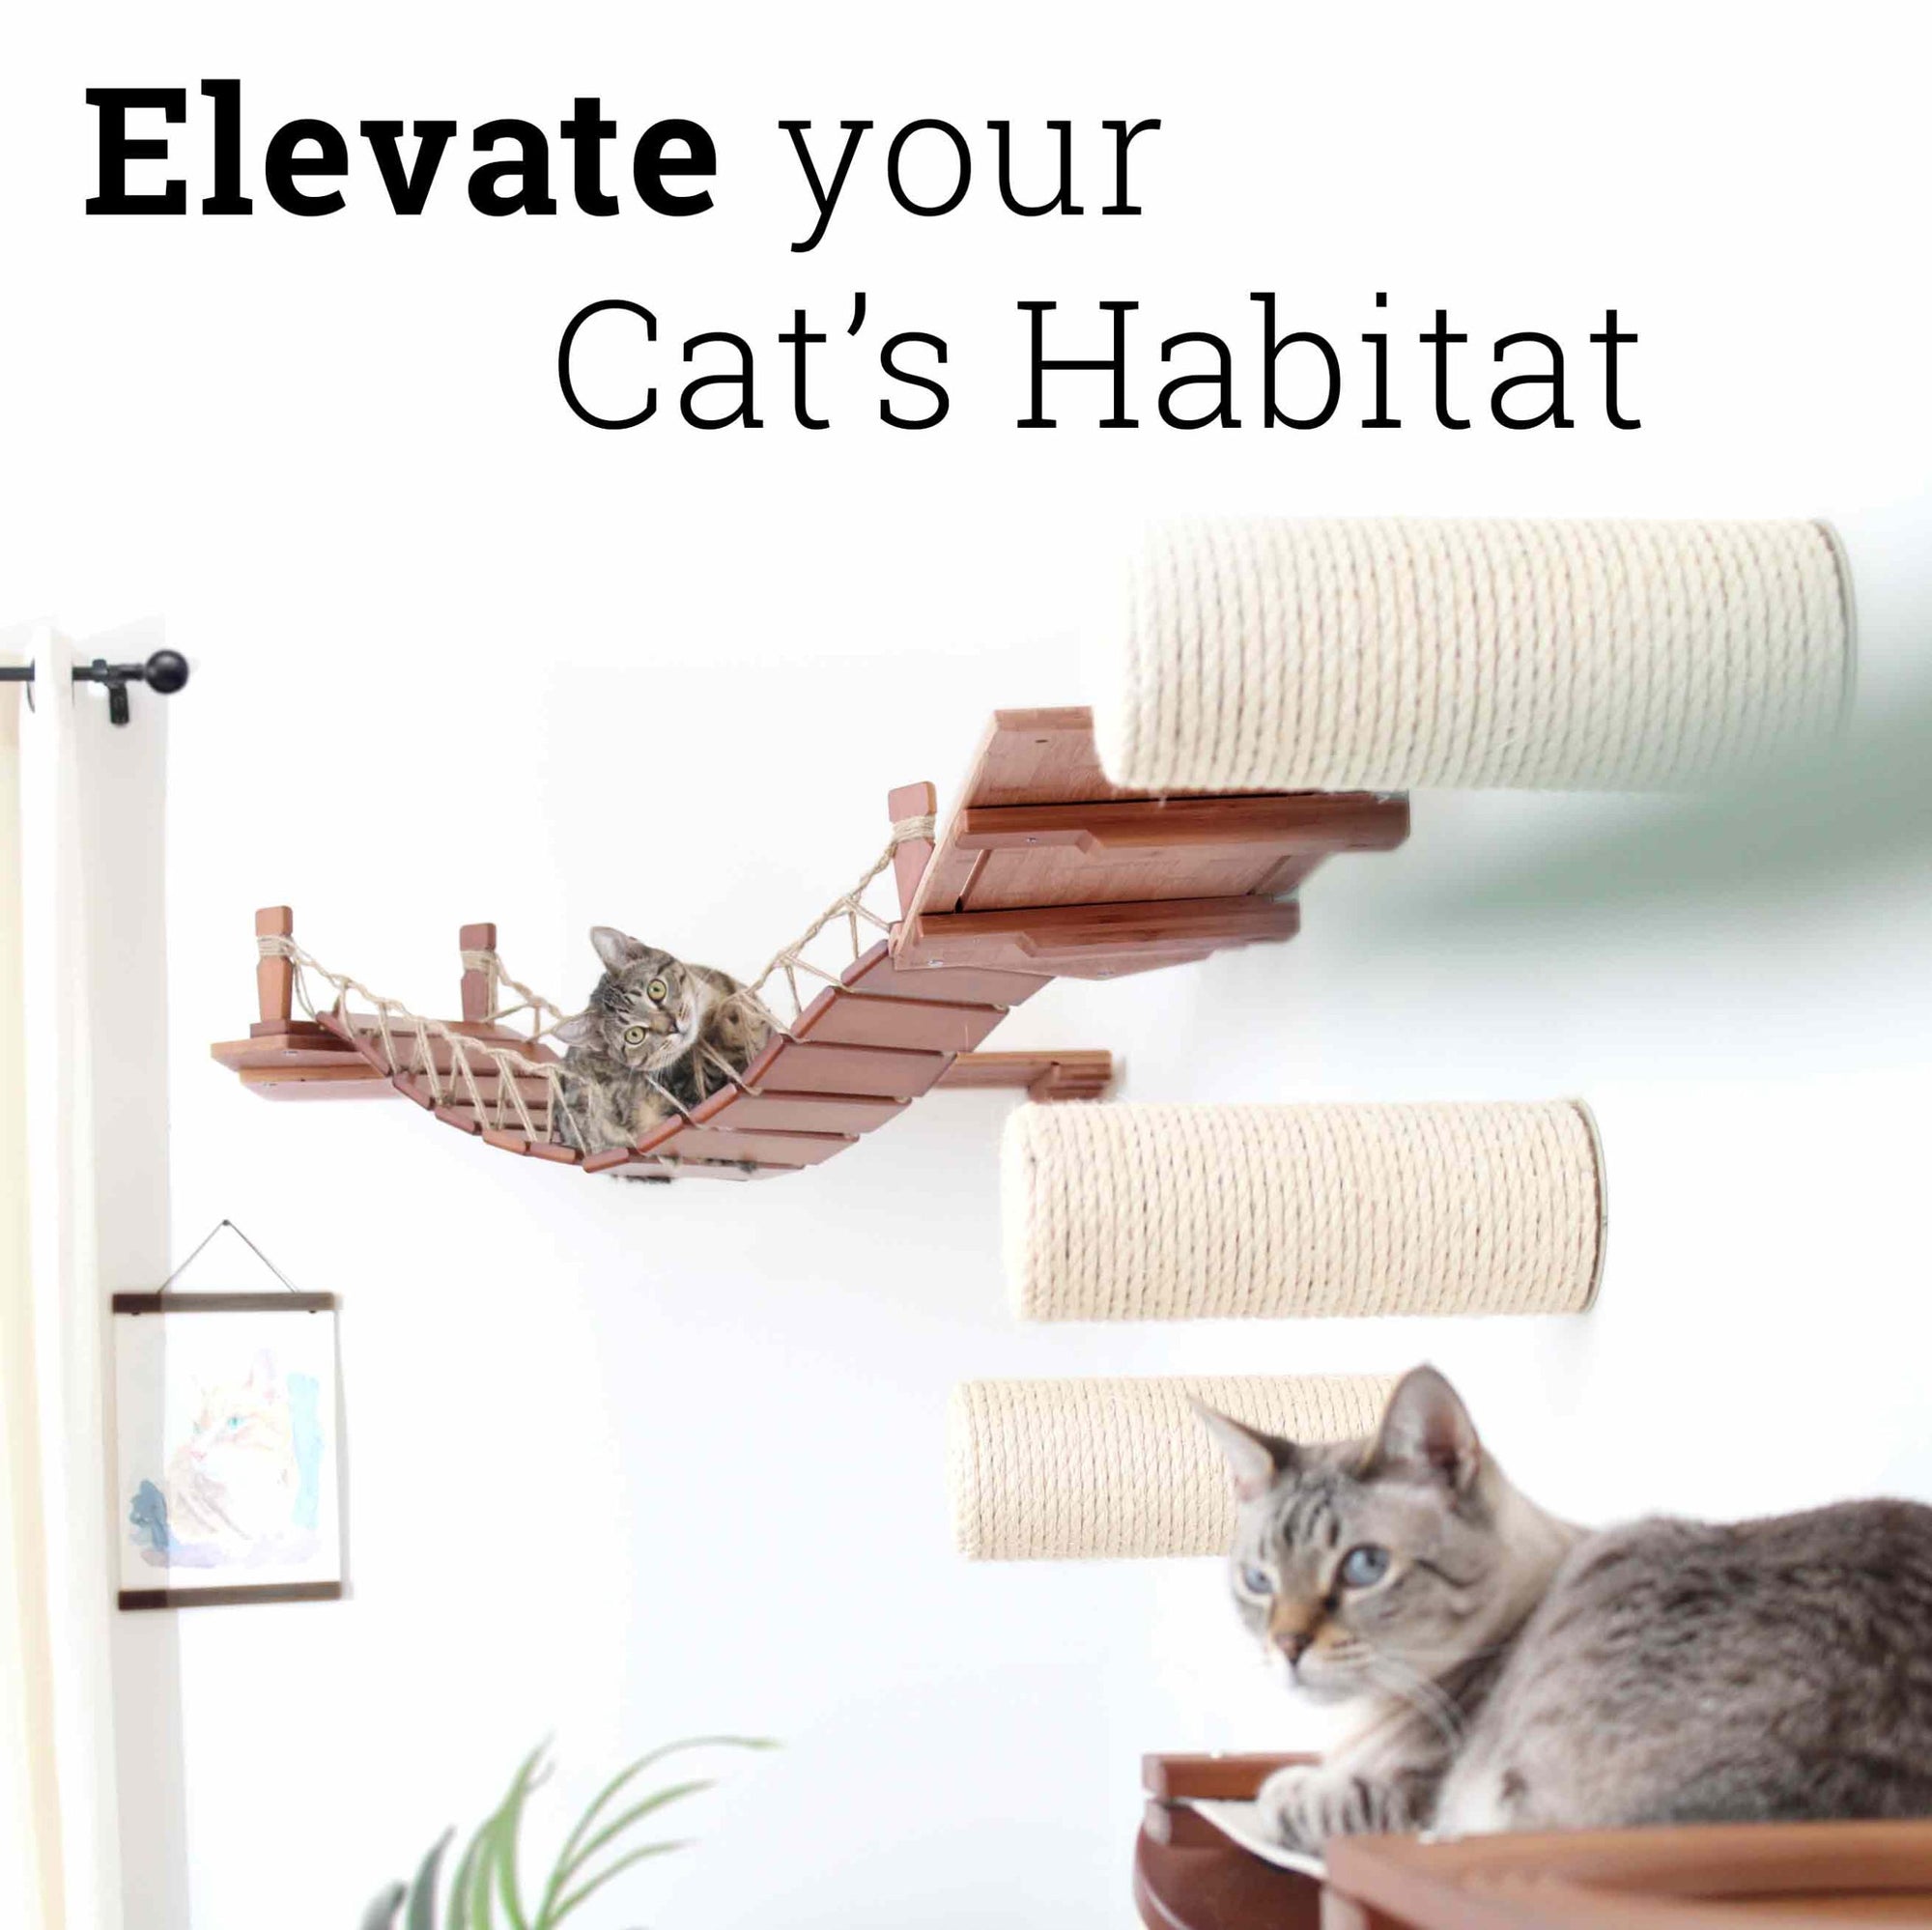 image states "elevate your cat's habitat" while showing two cats lounging on cat furniture installed on the wall